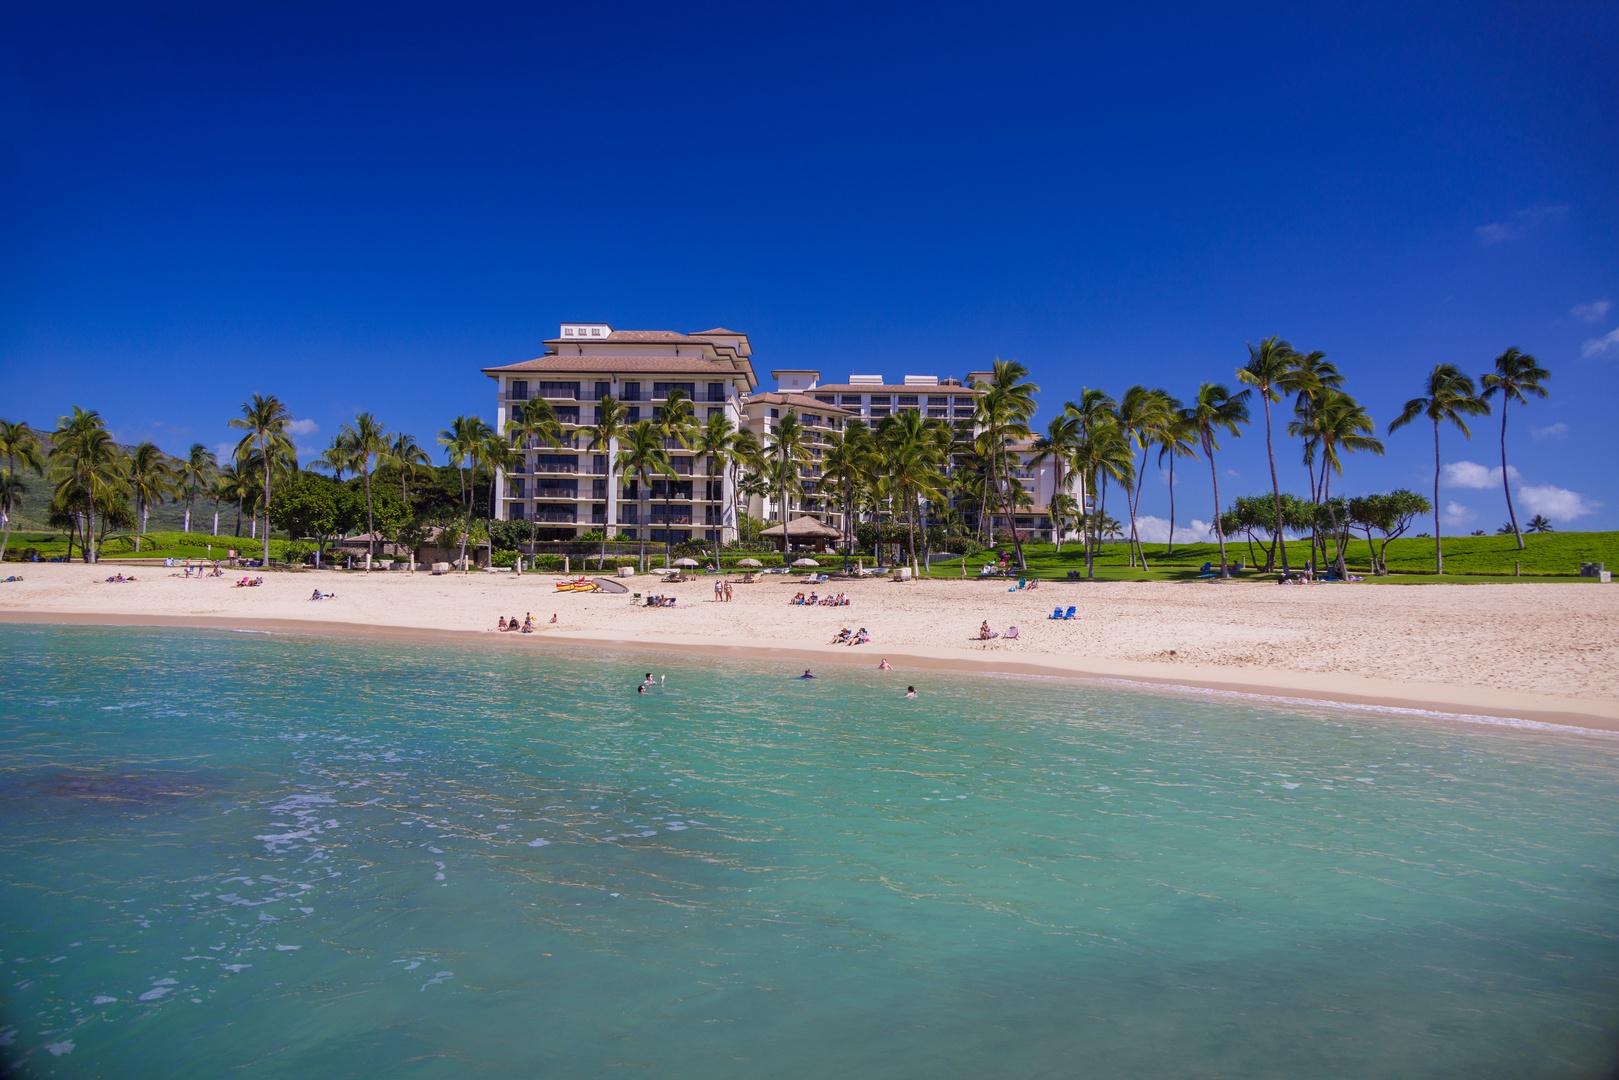 Kapolei Vacation Rentals, Ko Olina Kai 1047B - Ko Olina's private lagoons with soft sands and crystal blue water, perfect for afternoon swim or spectacular views.